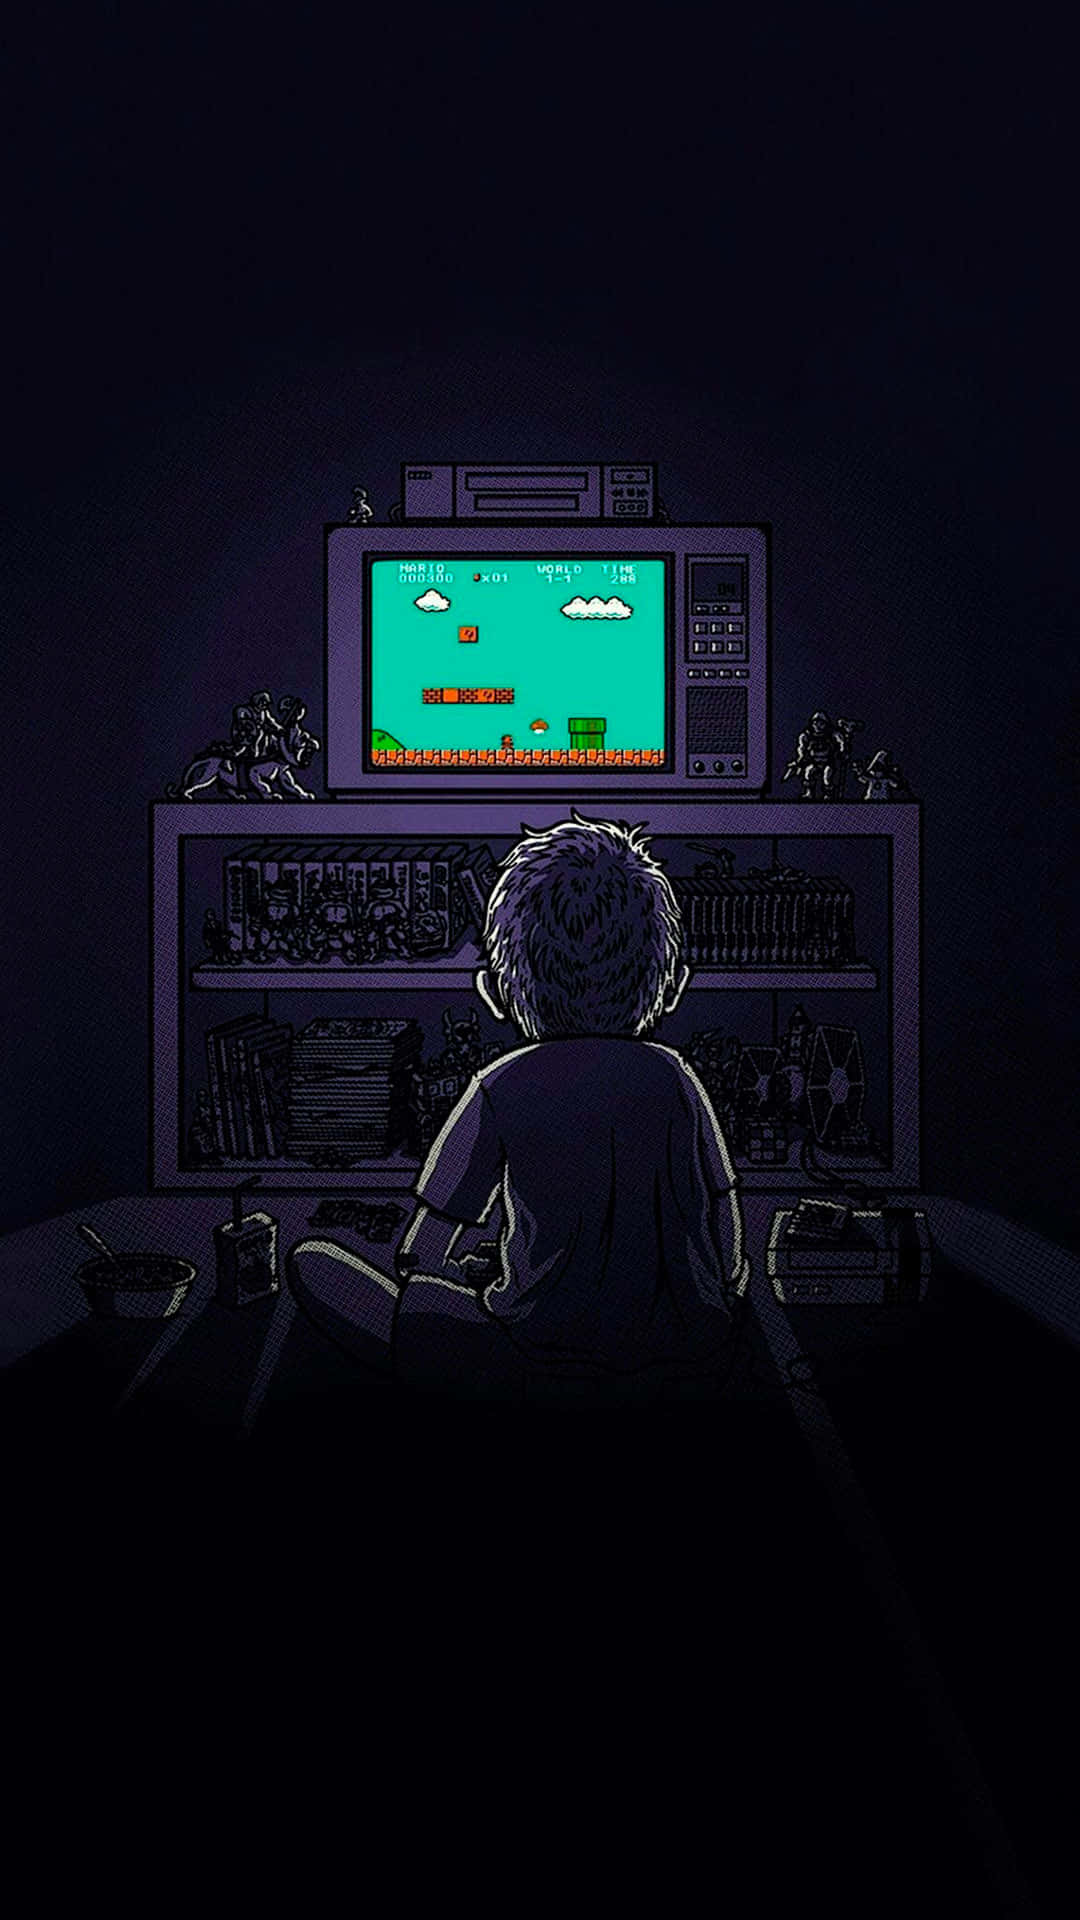 999 Retro Gaming Pictures  Download Free Images on Unsplash